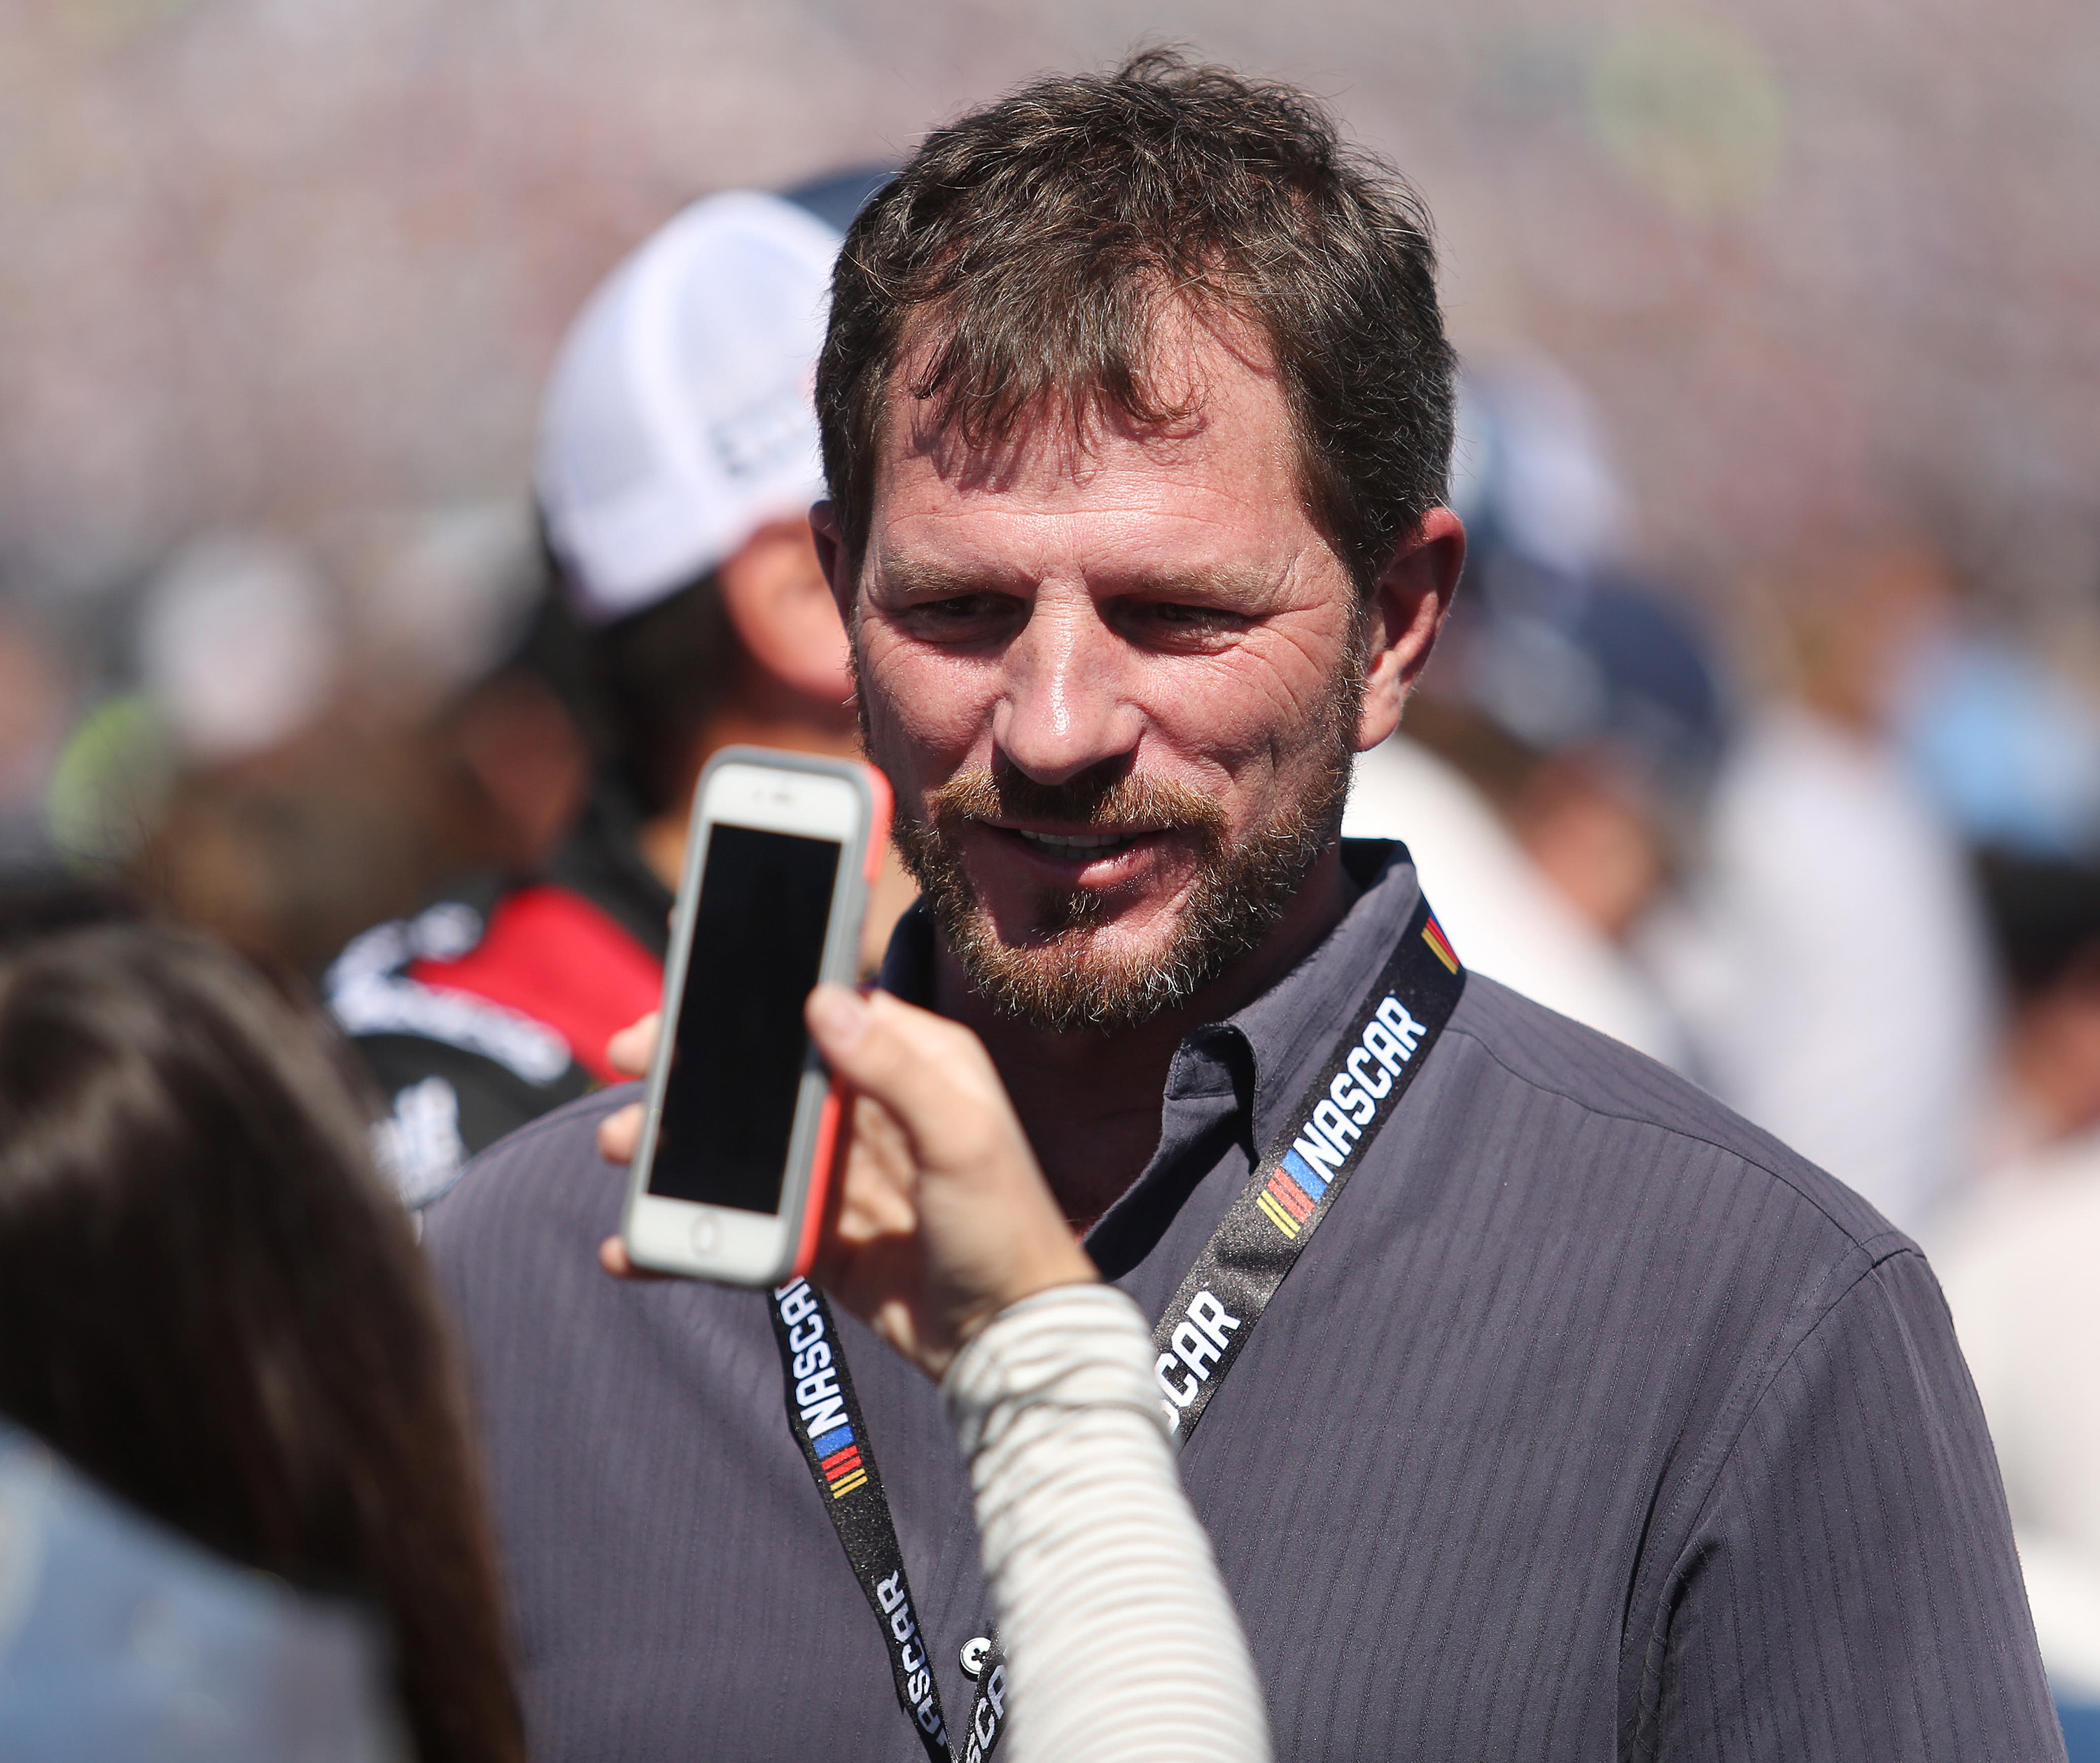 Kerry Earnhardt had the door slammed in his face during an early family reunion.